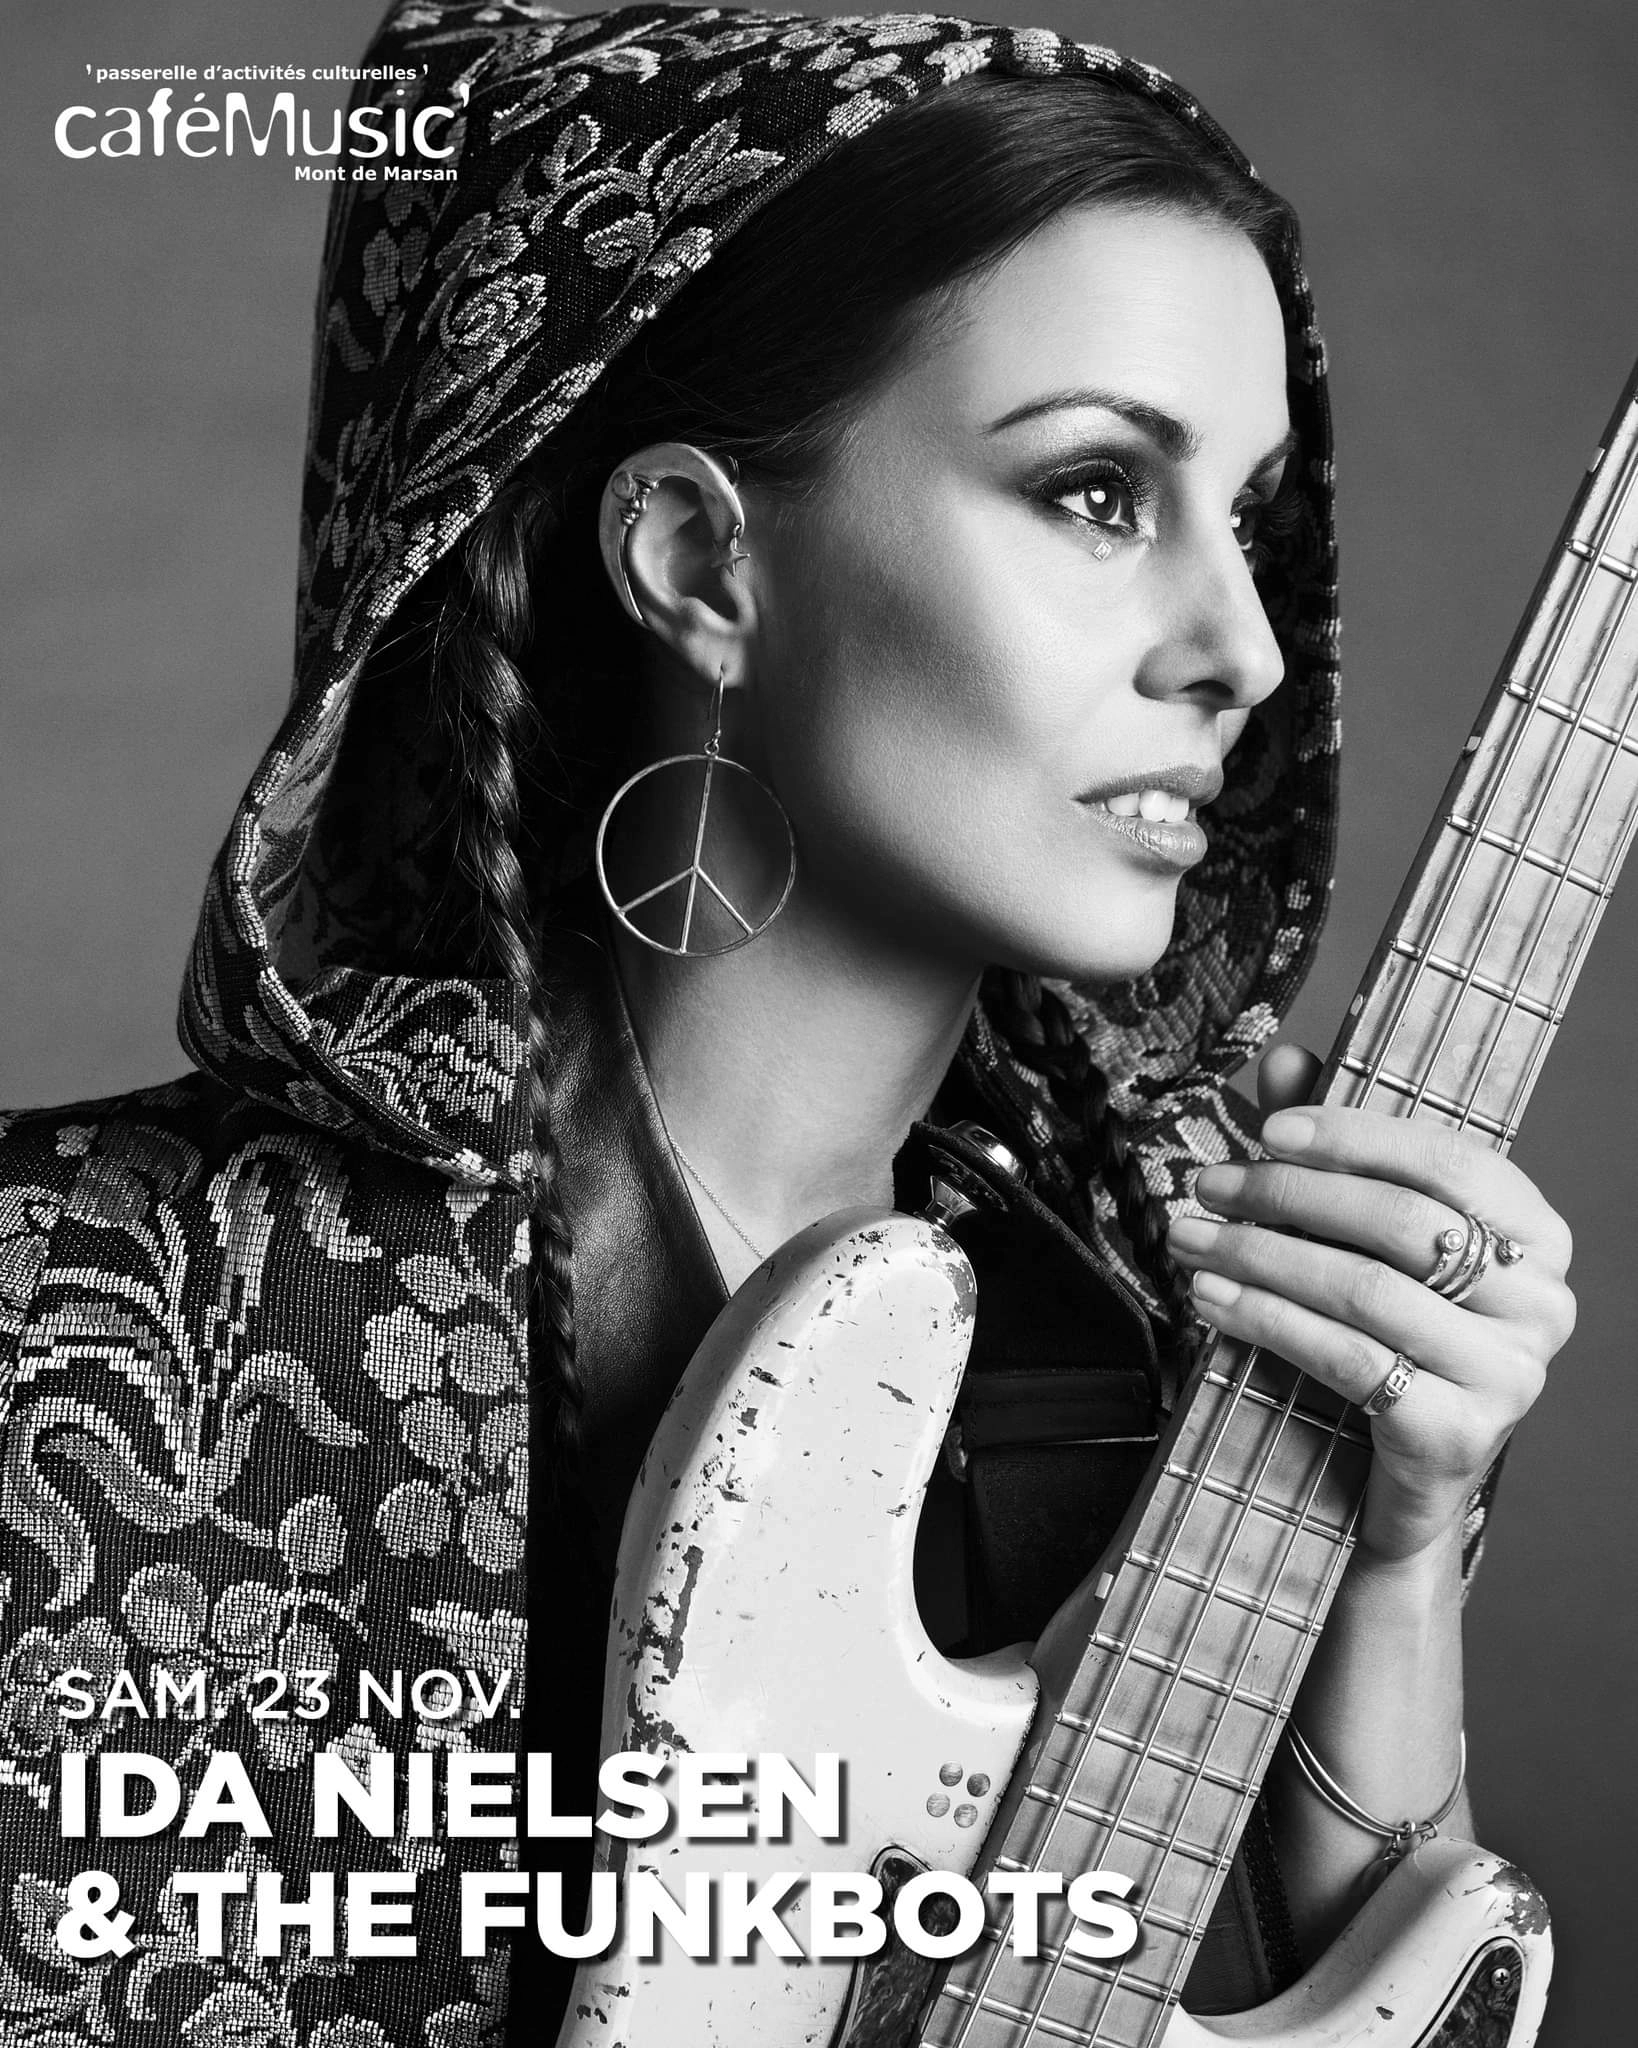 Ida Nielsen - The Funkbots in der Le Cafemusic Tickets